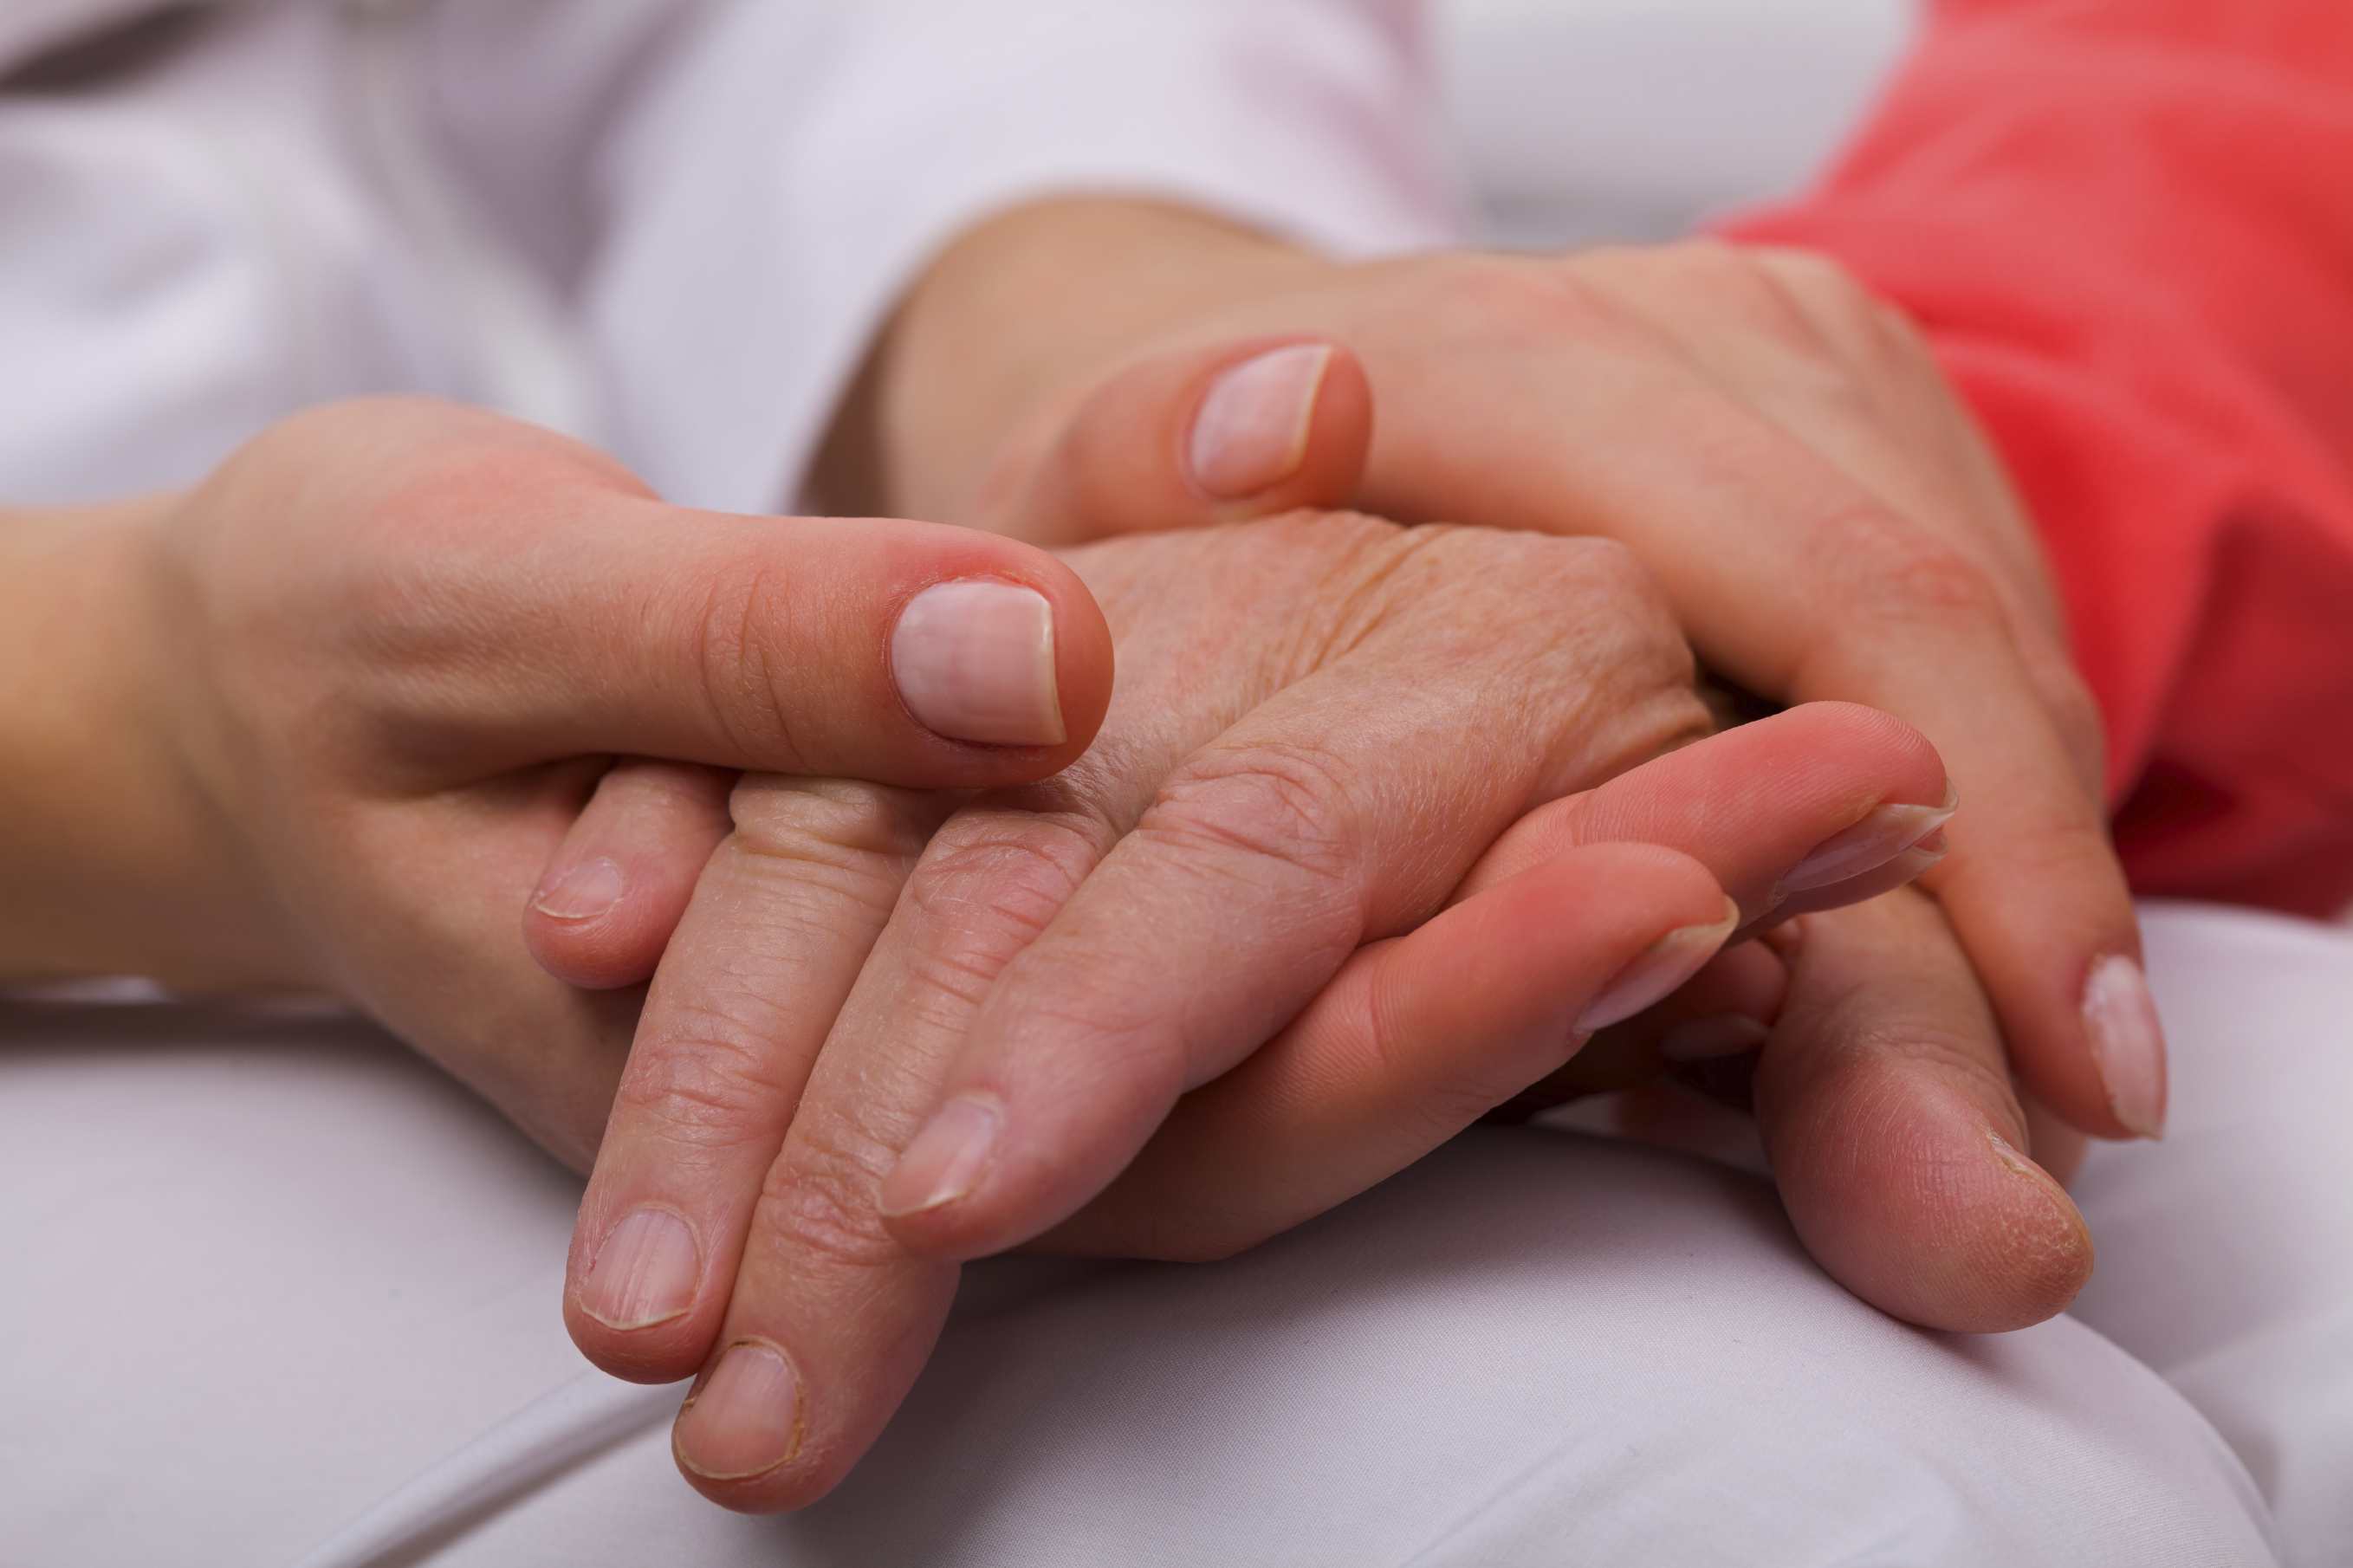 Providing Support For a Loved One With Cancer